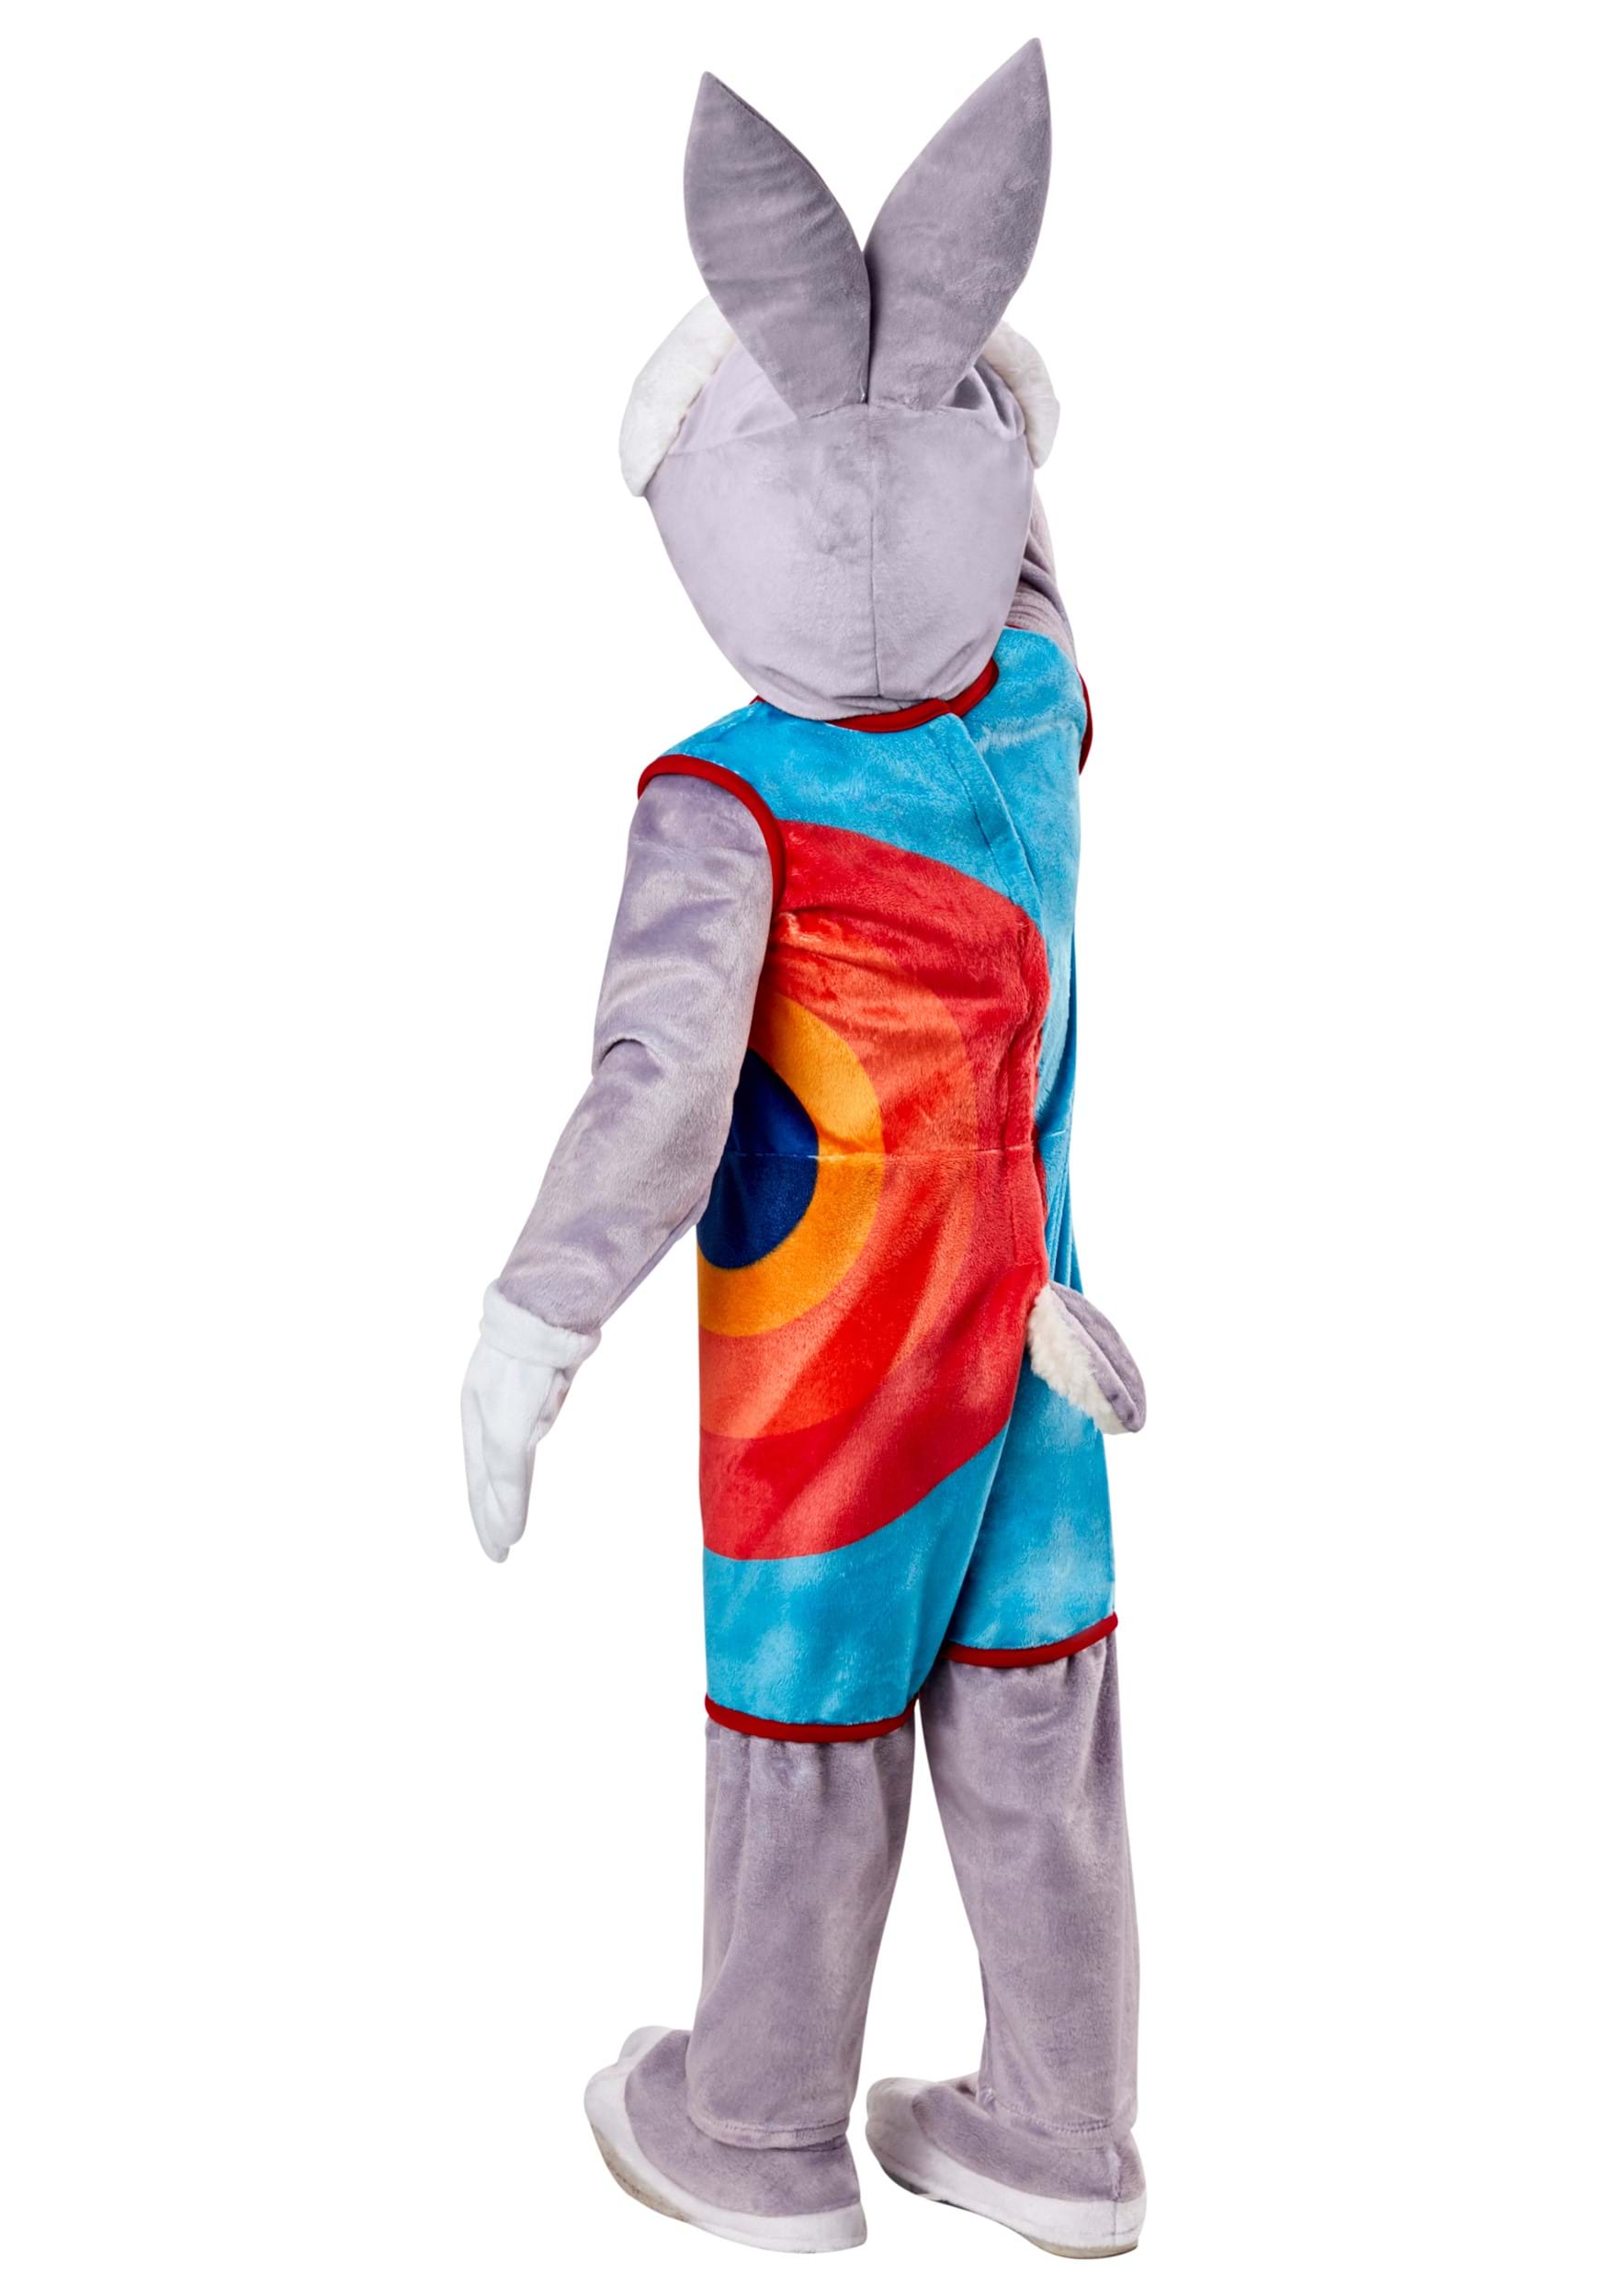 Toddler Space Jam 2 Bugs Bunny Tune Squad Fancy Dress Costume